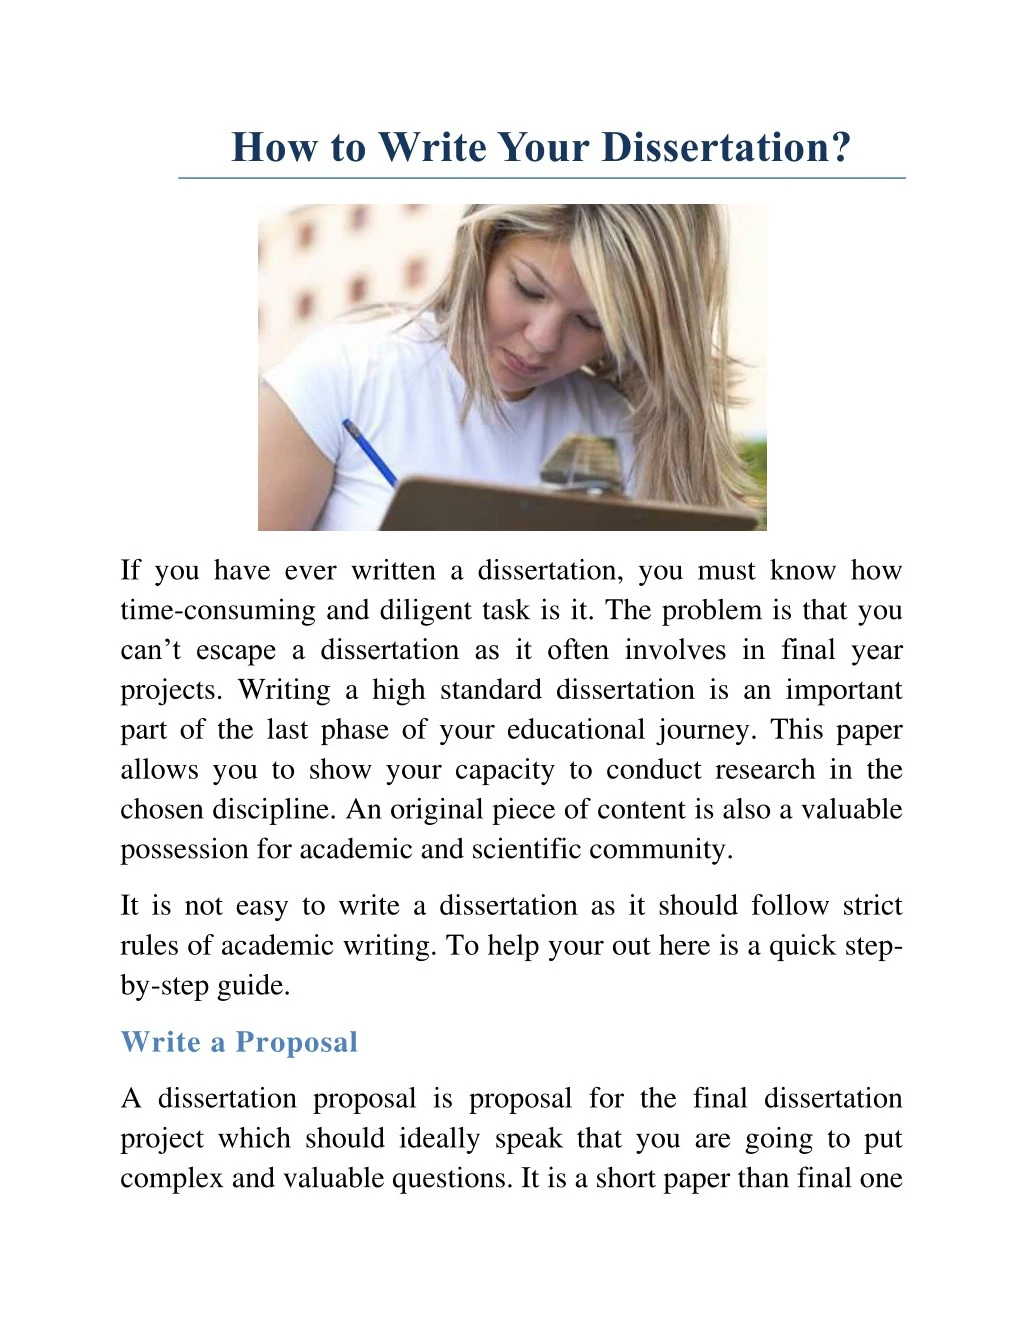 how to write your dissertation